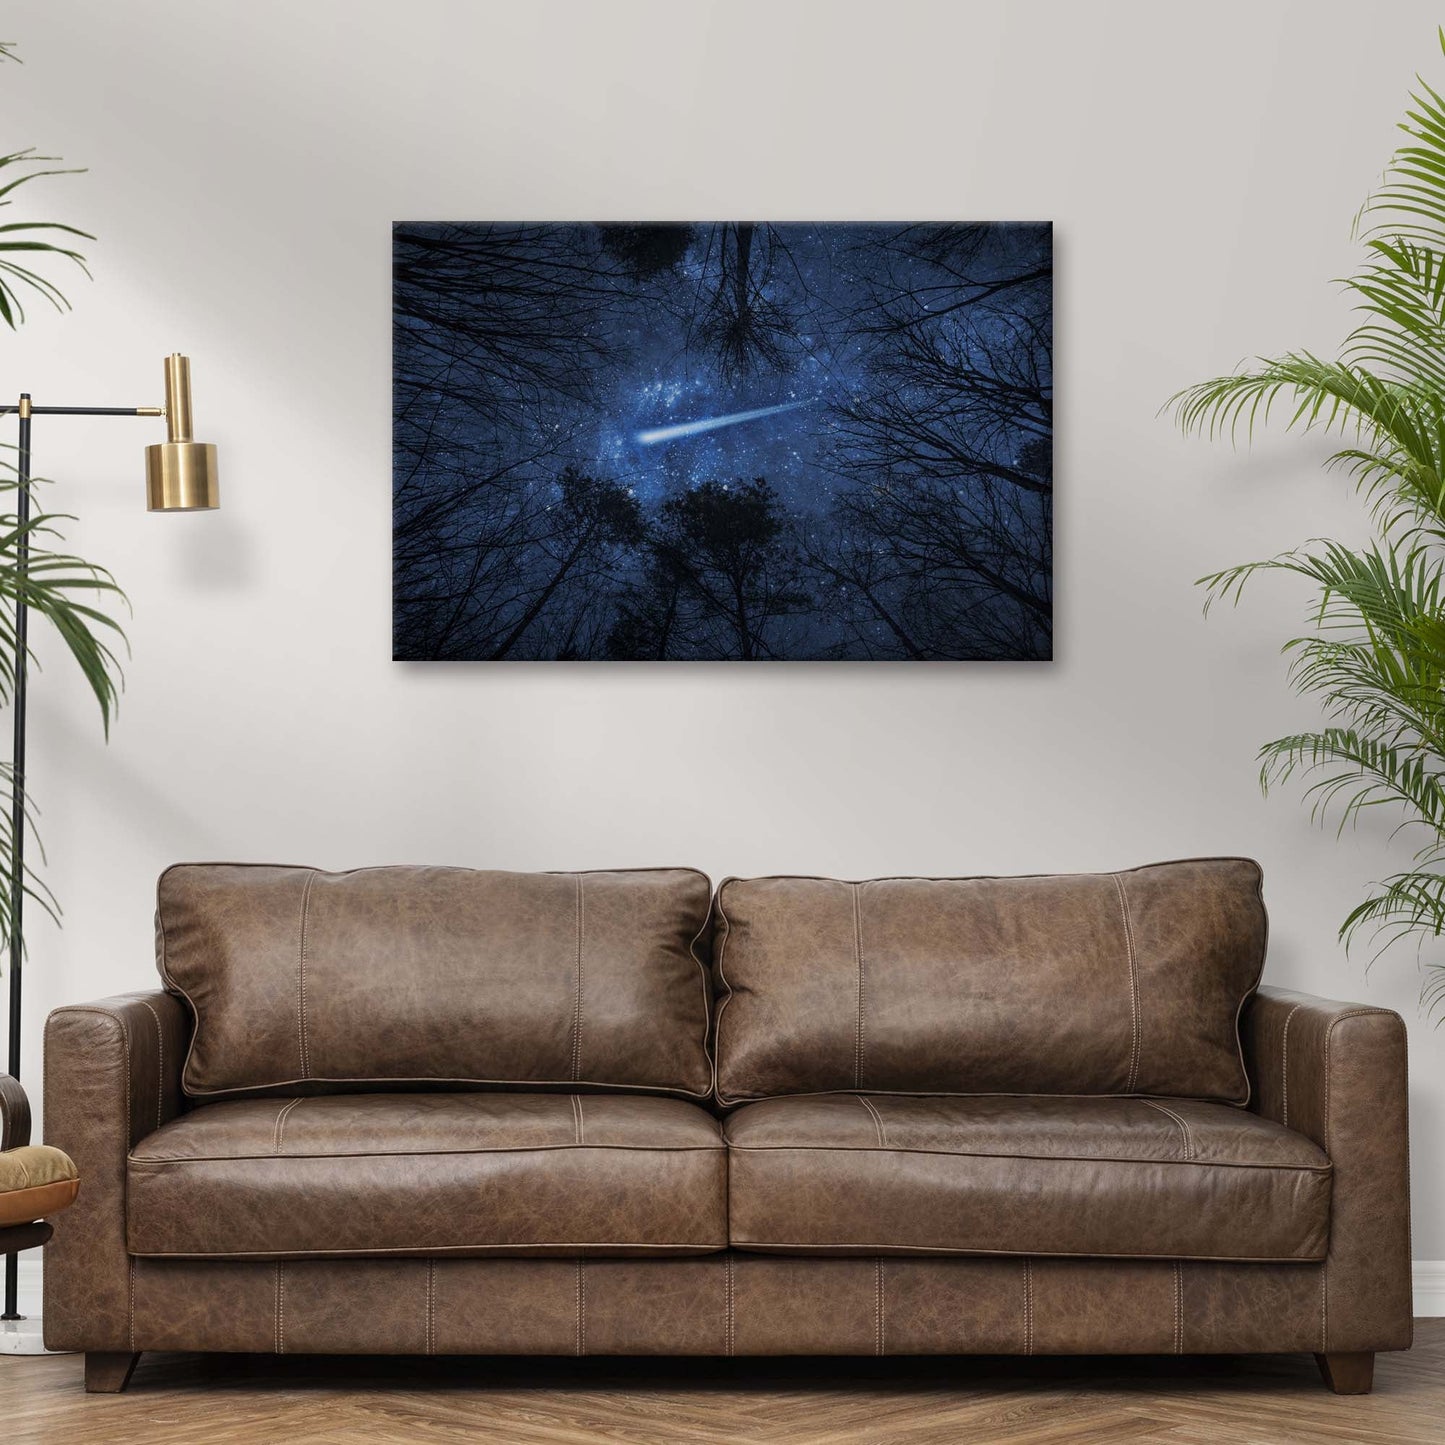 Night Sky Trail Comet Over Trees Canvas Wall Art